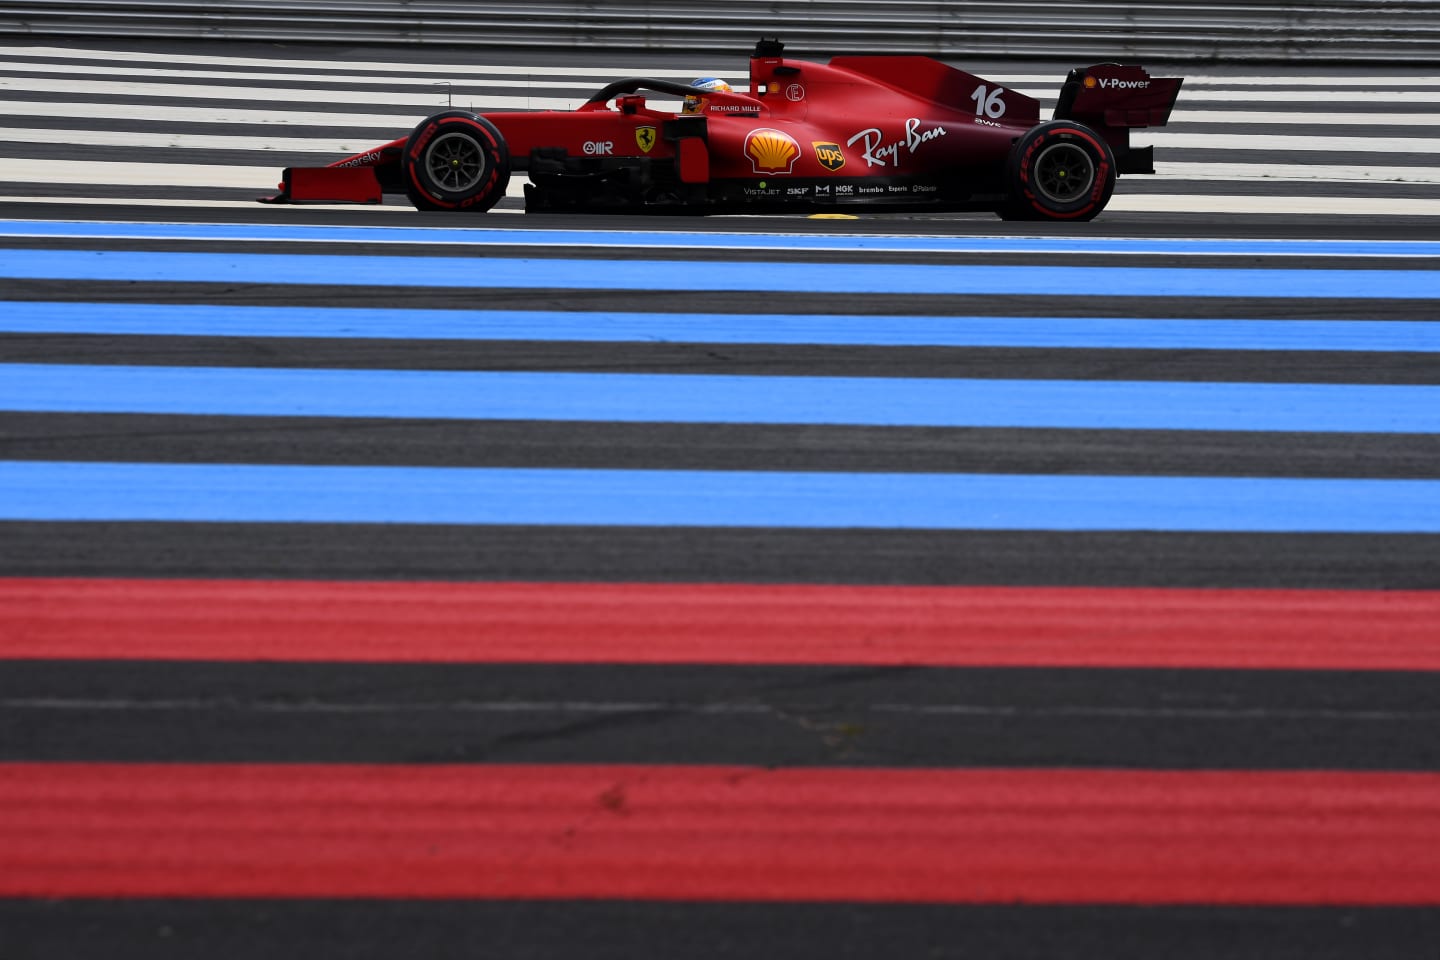 LE CASTELLET, FRANCE - JUNE 19: Charles Leclerc of Monaco driving the (16) Scuderia Ferrari SF21 on track during final practice ahead of the F1 Grand Prix of France at Circuit Paul Ricard on June 19, 2021 in Le Castellet, France. (Photo by Rudy Carezzevoli/Getty Images)